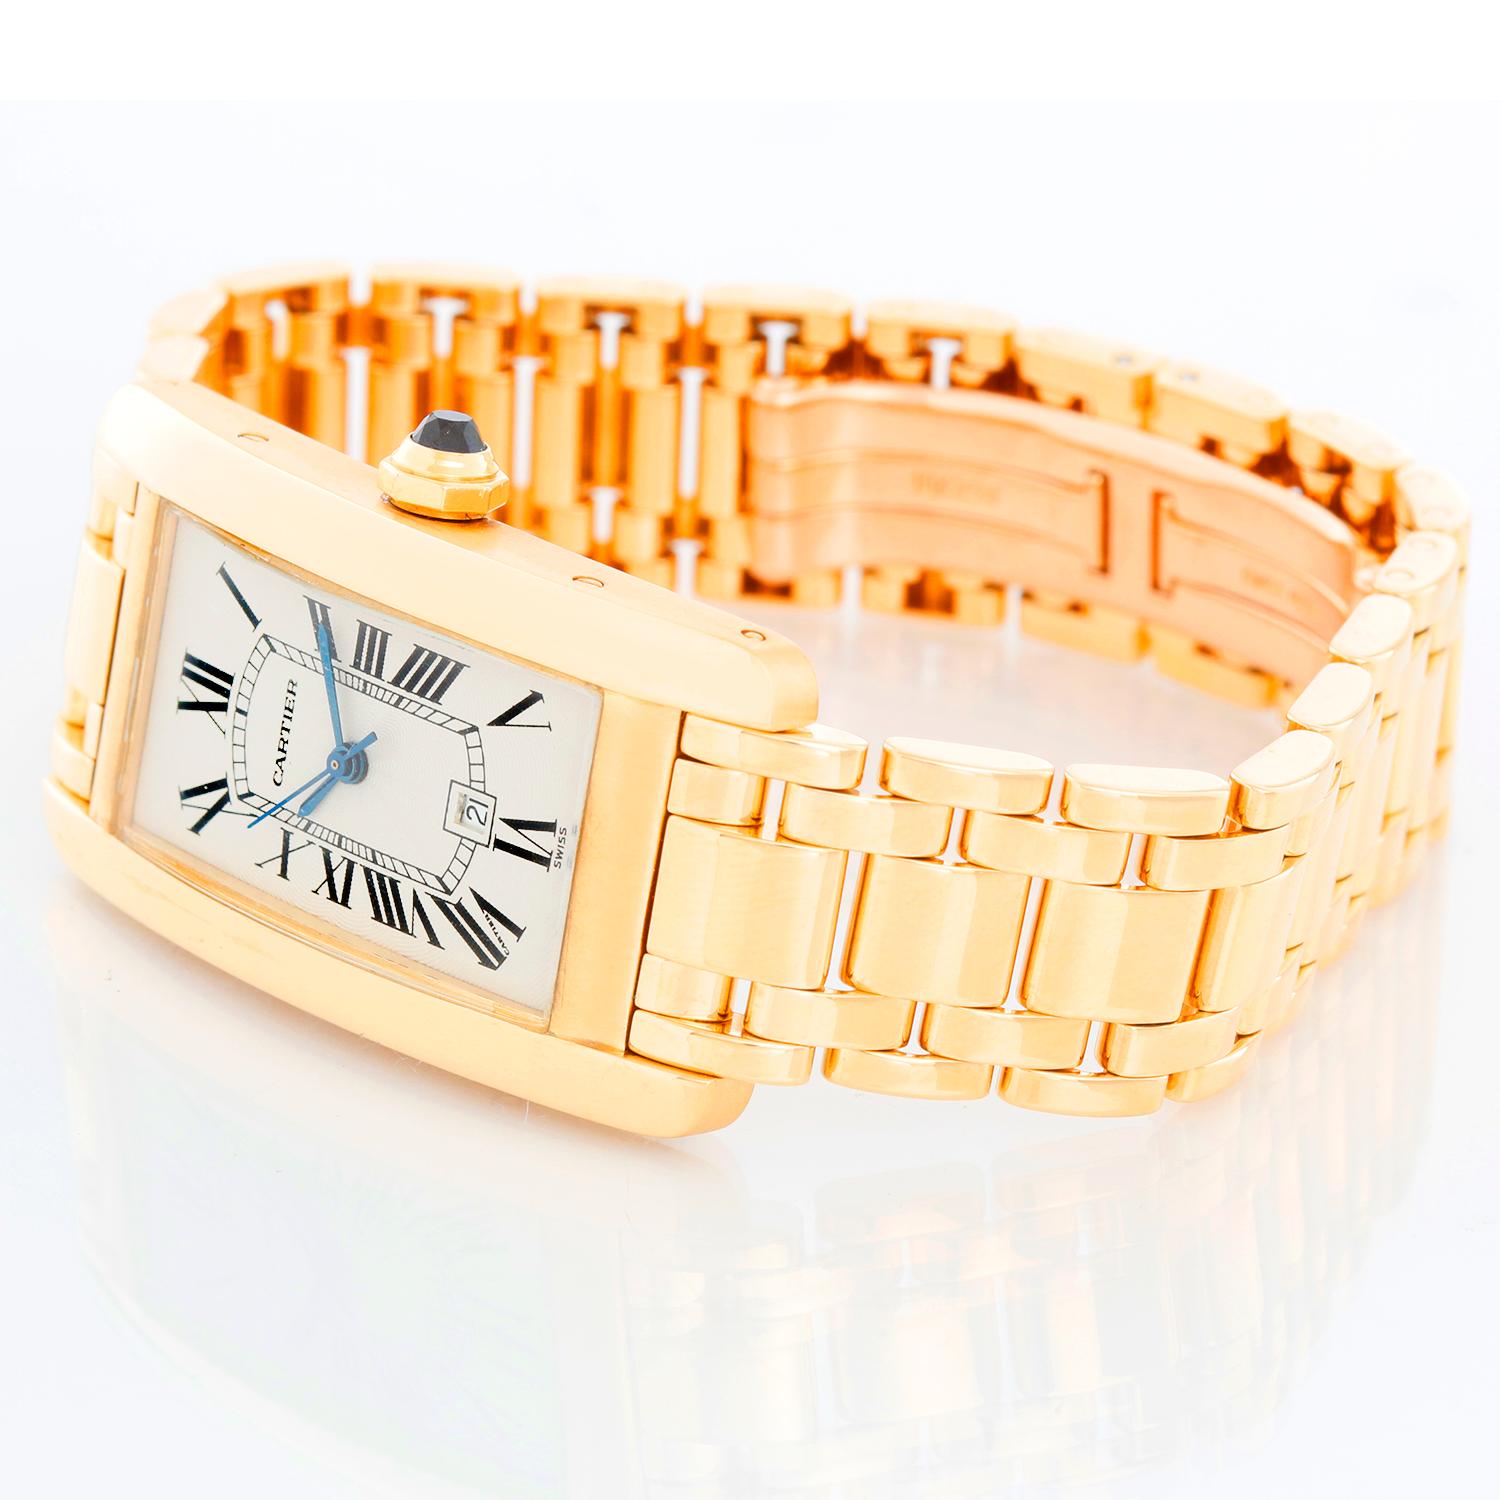 Cartier Tank Americaine (or American) Men's Gold Watch W2603156 - Automatic winding with date. 18k yellow gold rectangular style case (23 mm x 42 mm). Silver dial with black Roman numerals. 18K yellow gold Cartier bracelet. Pre-owned with Cartier